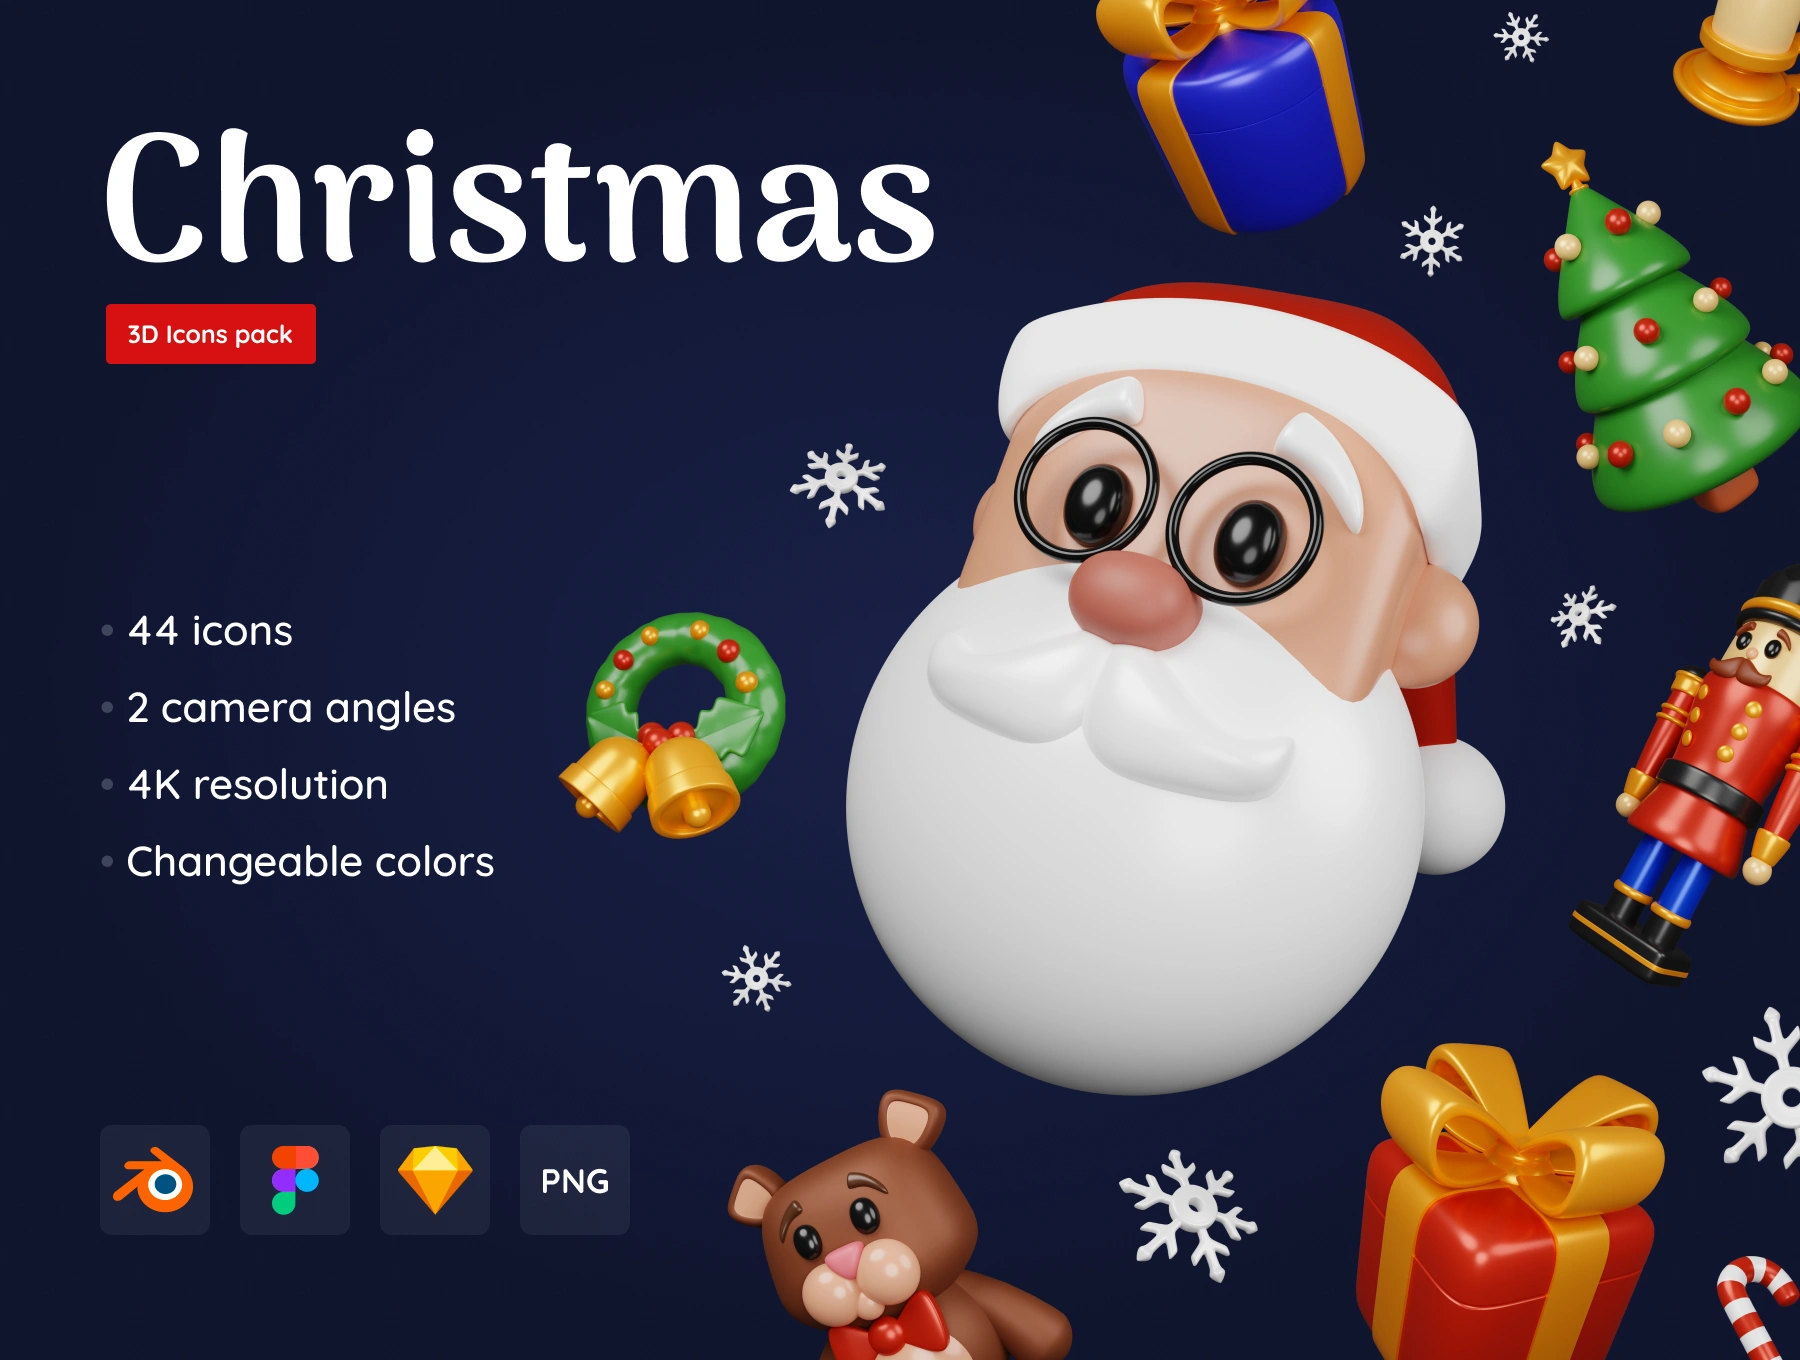 [VIP] Christmas Pack: Customizable 3D Icons